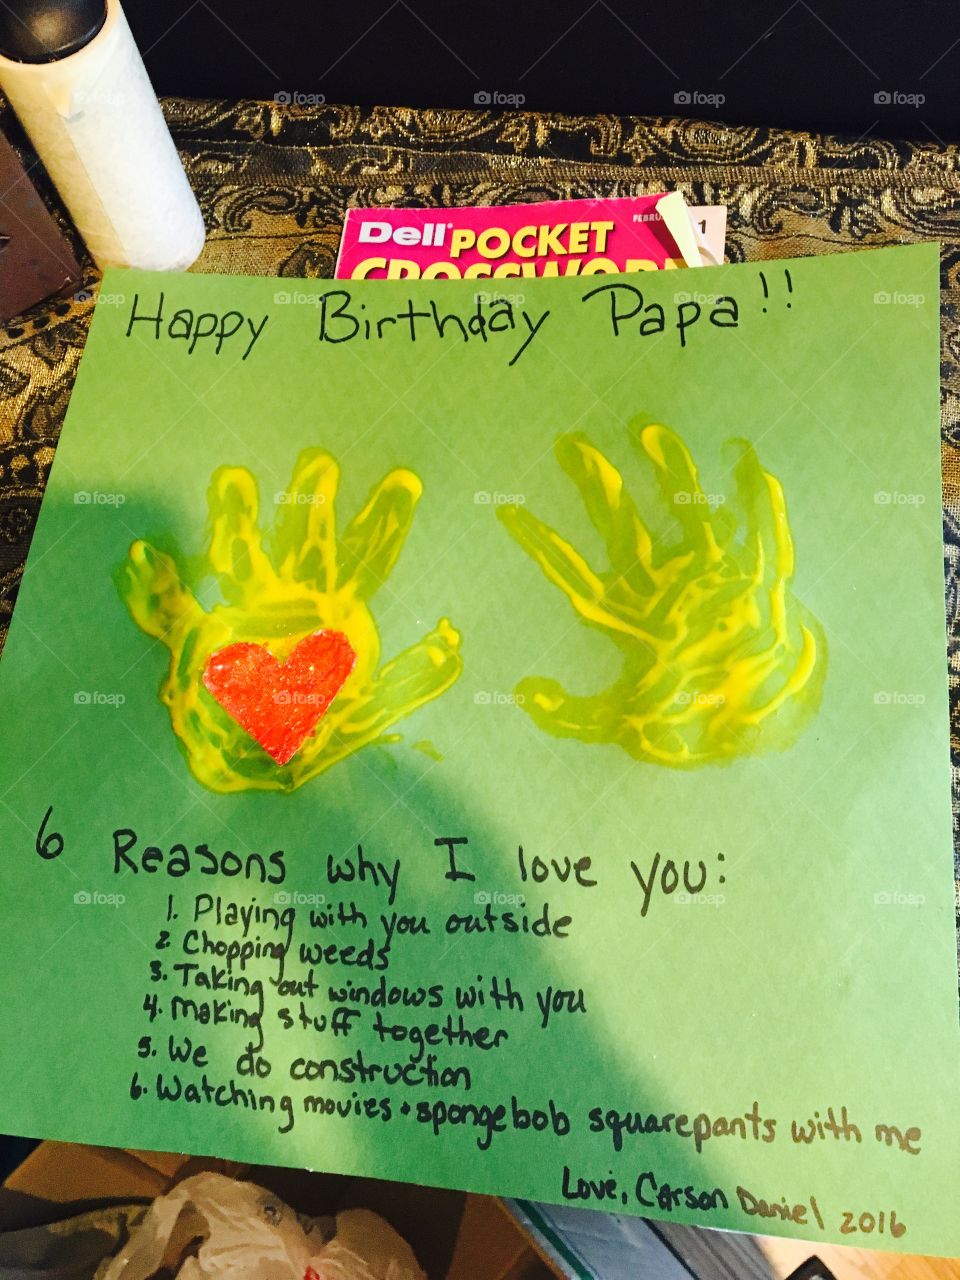 Nephew and I worked on a little art project for my dad's birthday; I think it was the best present he got. Papa love 